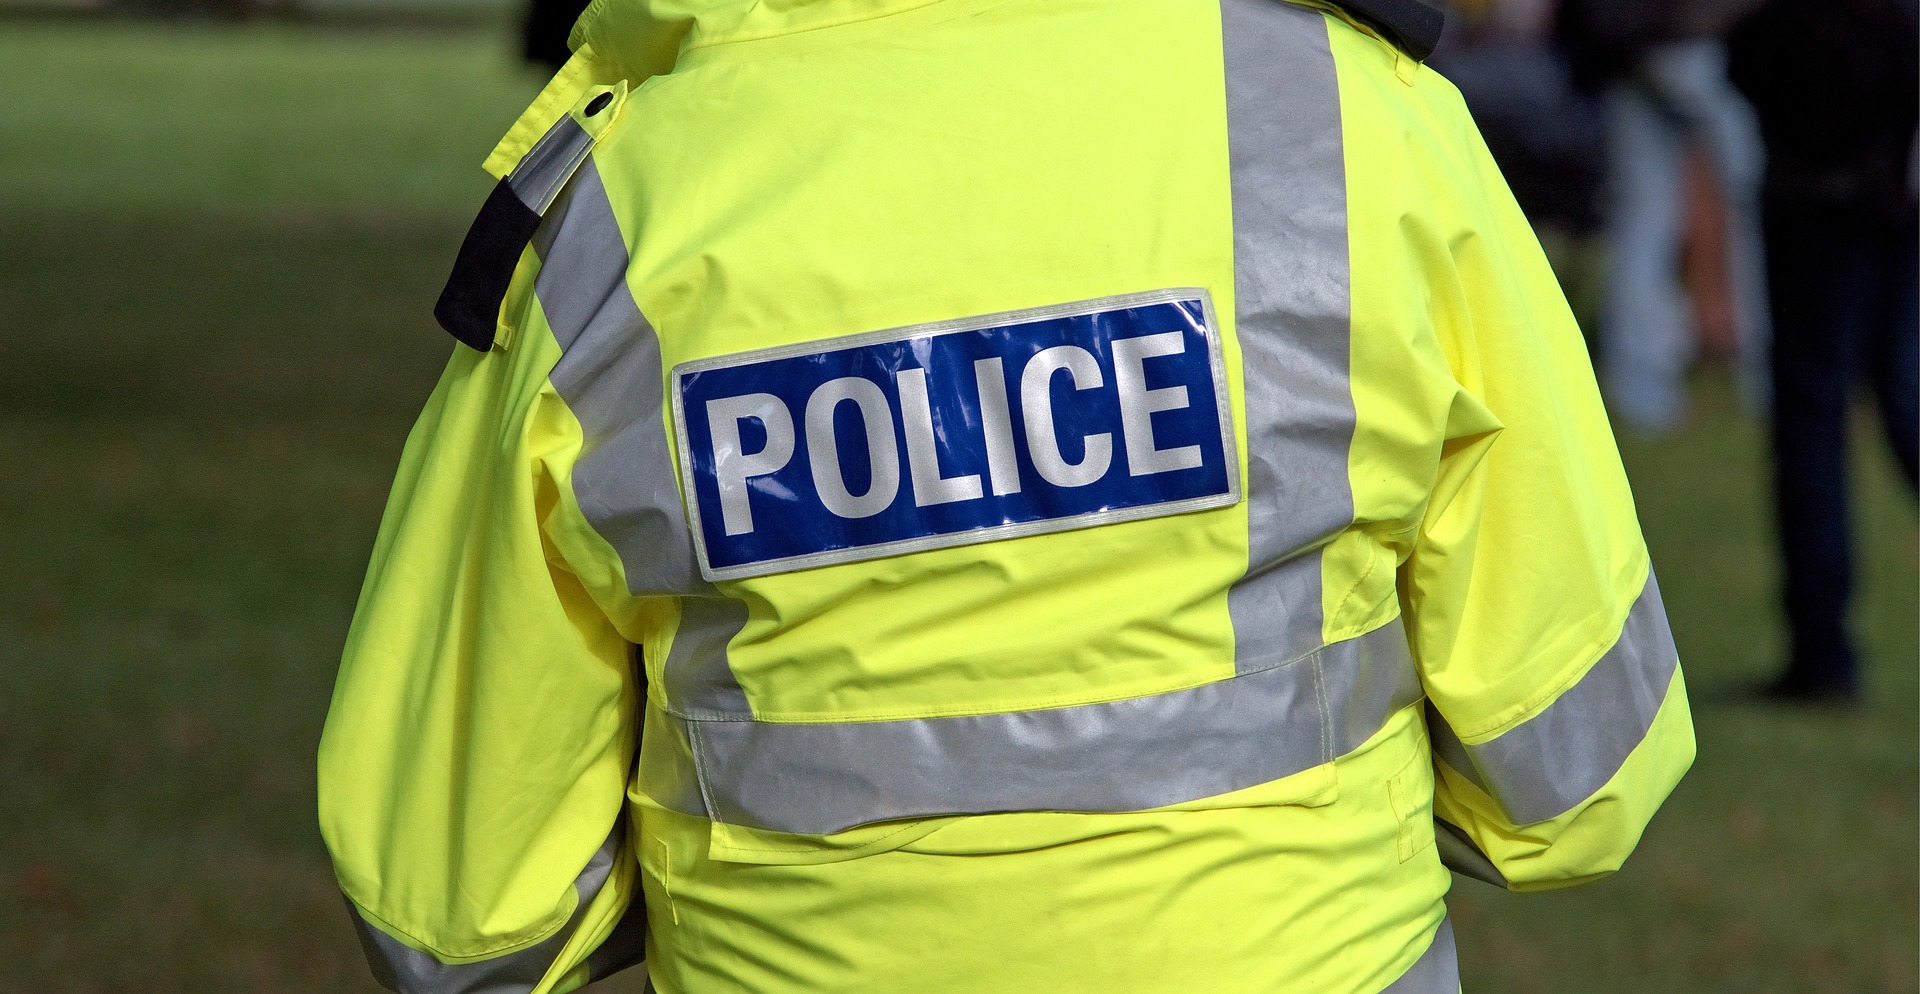 A photograph of a policeman from behind wearing a high-vis jacket with the word 'Police'